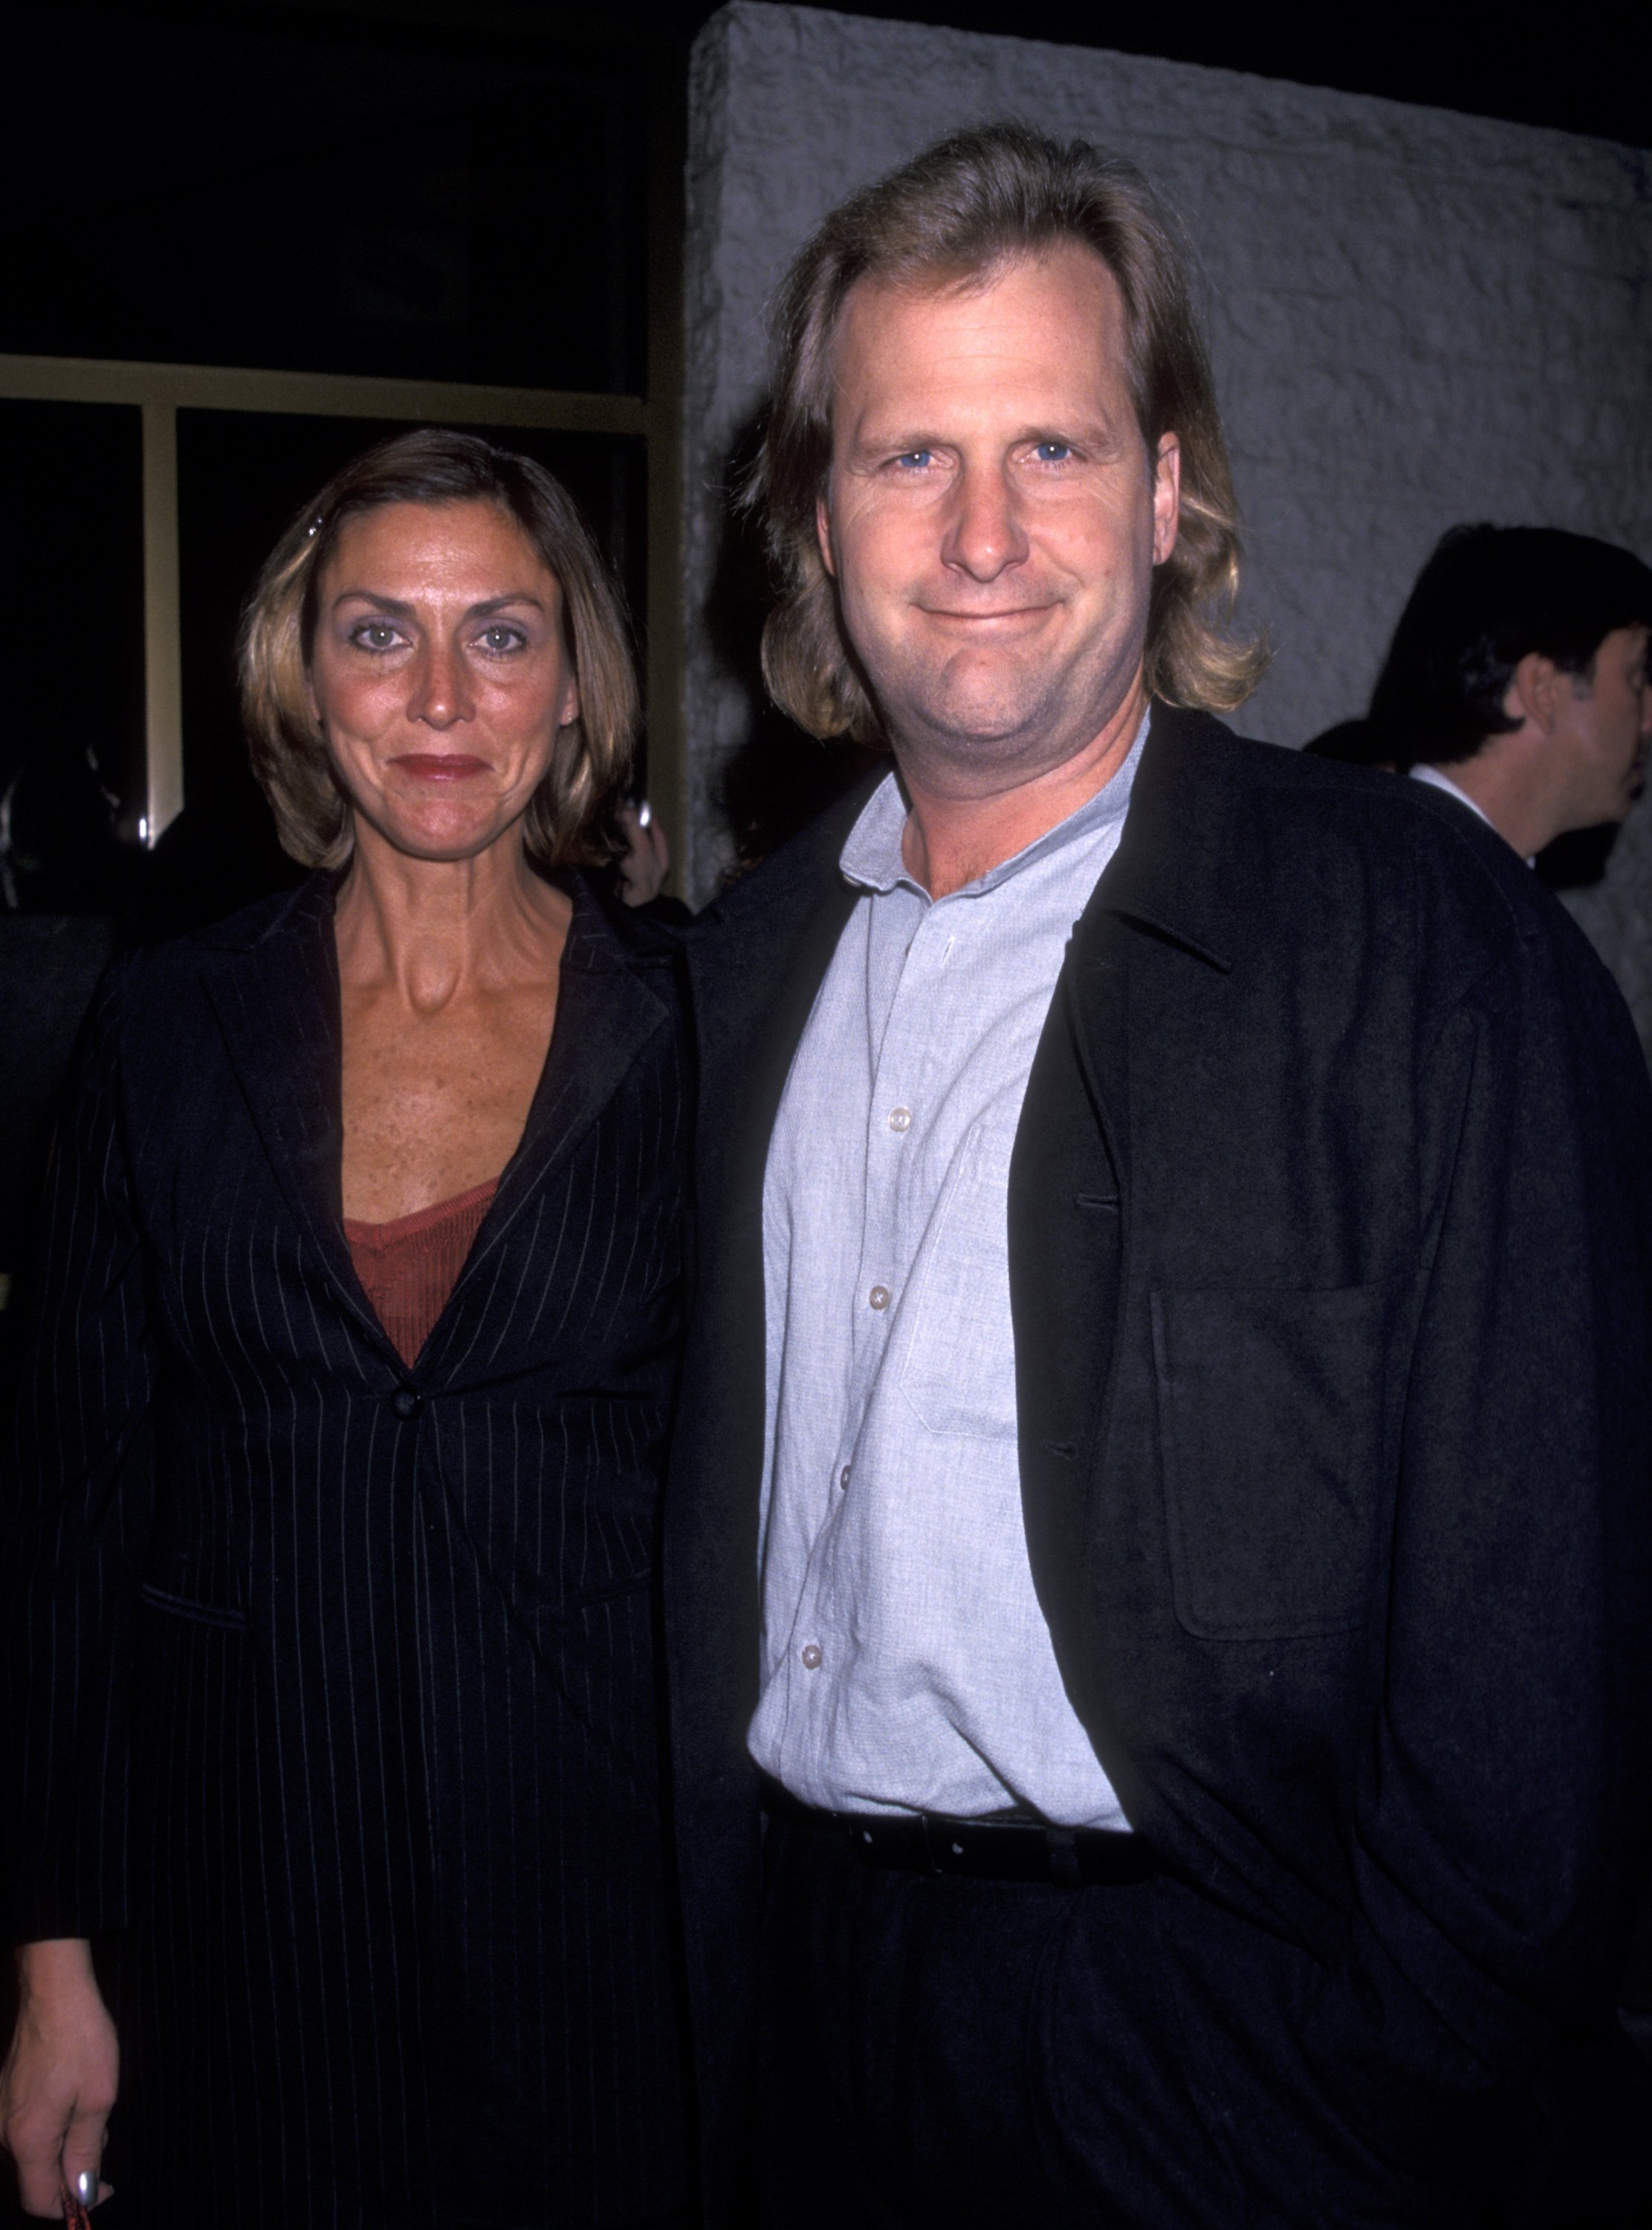 Kathleen Treado and Jeff Daniels during the "Pleasantville" Los Angeles premiere in Westwood, California, on October 19, 1998. | Source: Ron Galella/Ron Galella Collection/Getty Images